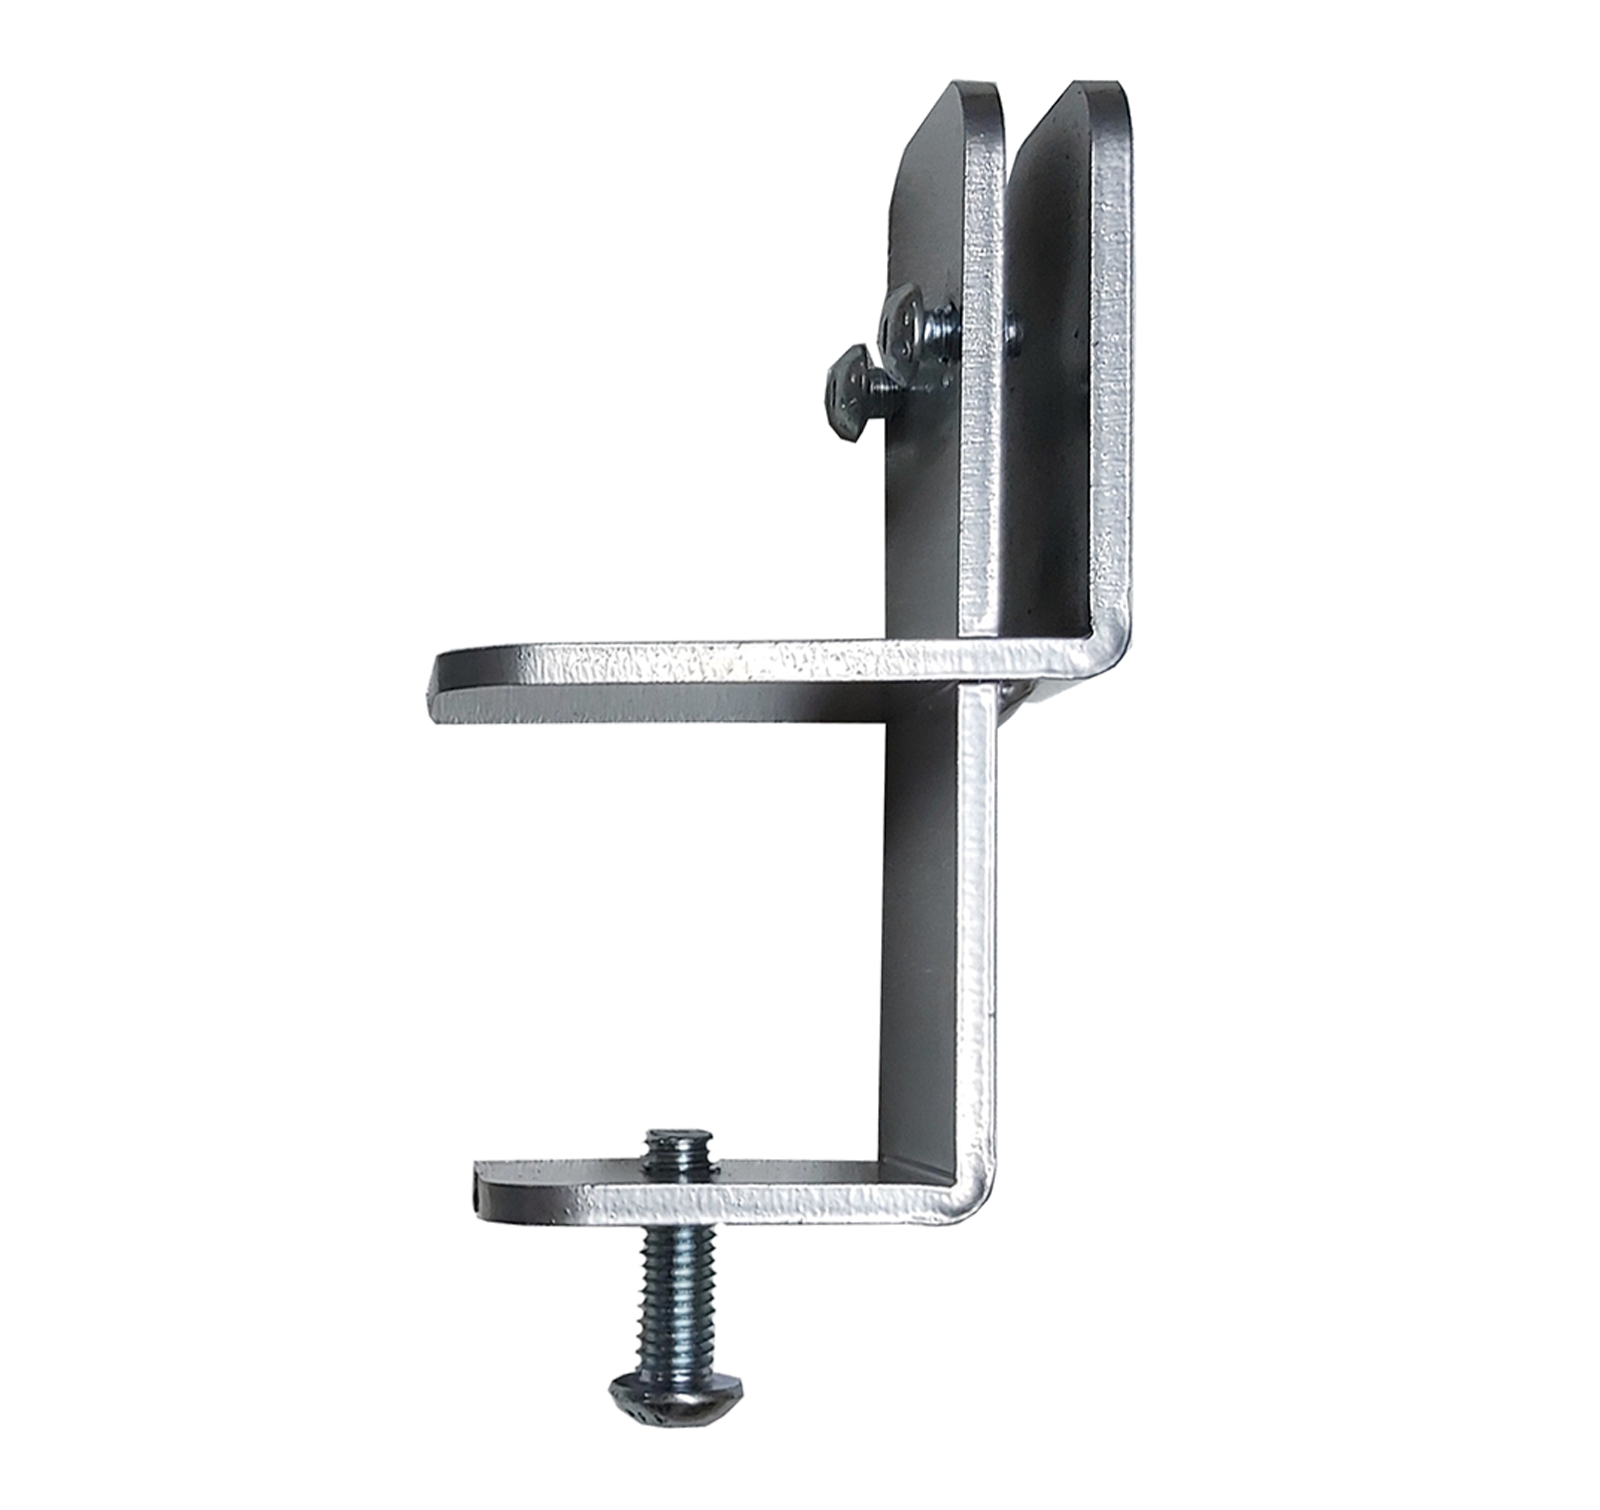 Sold Individually Schools Colleges K143 and Shared Spaces 3 Sizes Large - 45mm K142+ Desk Bracket Clamp for Desk & Table Mounting of Sneeze Guards and Desk Screens in Offices